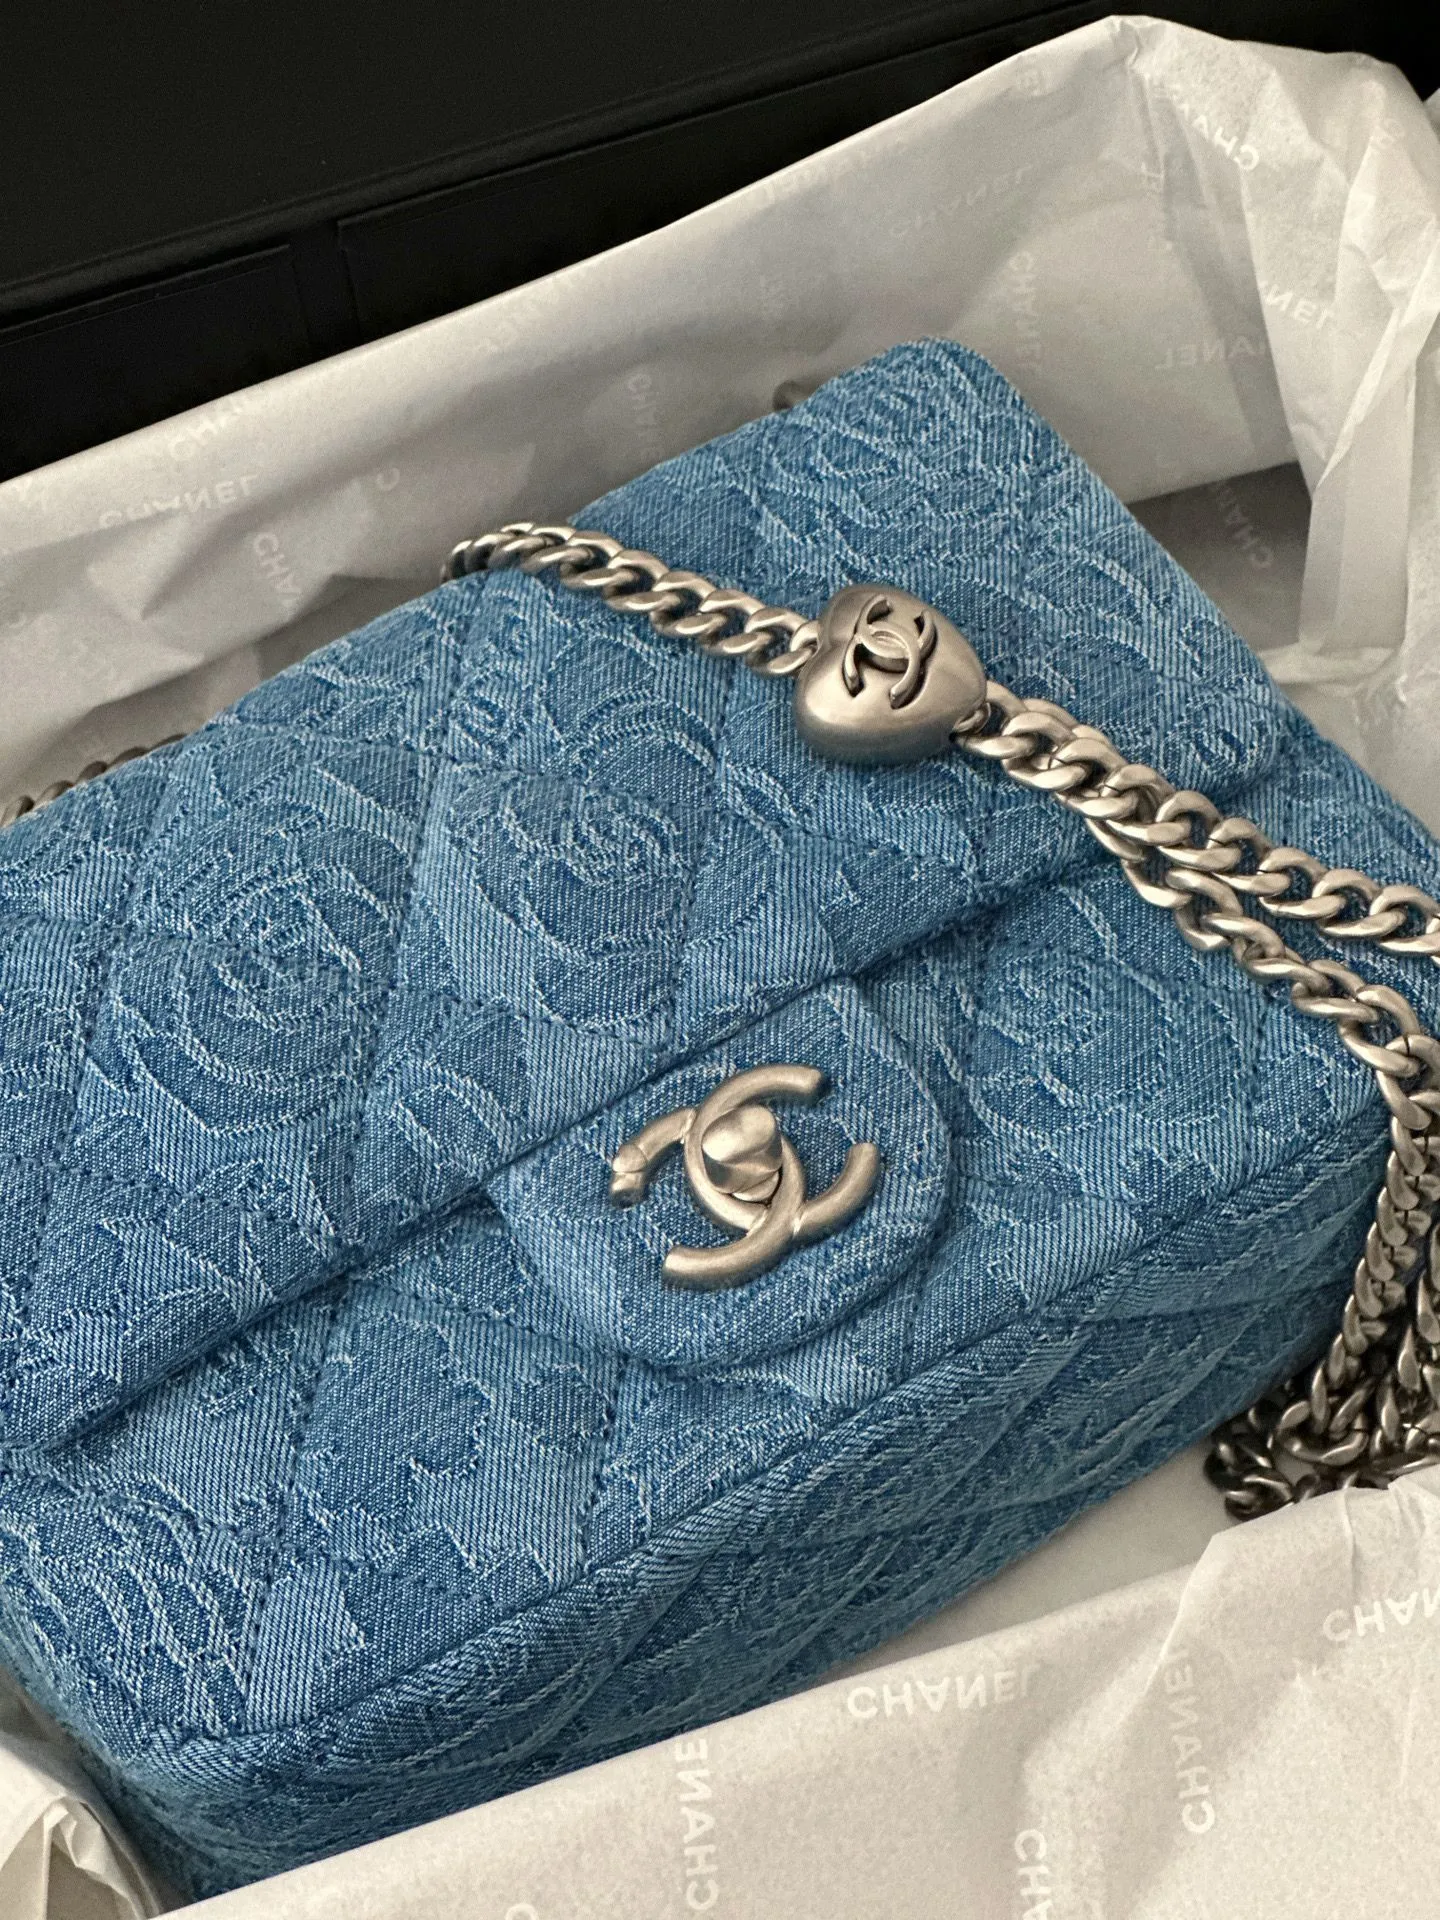 CHANEL 19 DENIM FLAP BAG 6 MONTH WEAR AND TEAR & WHAT FITS INSIDE